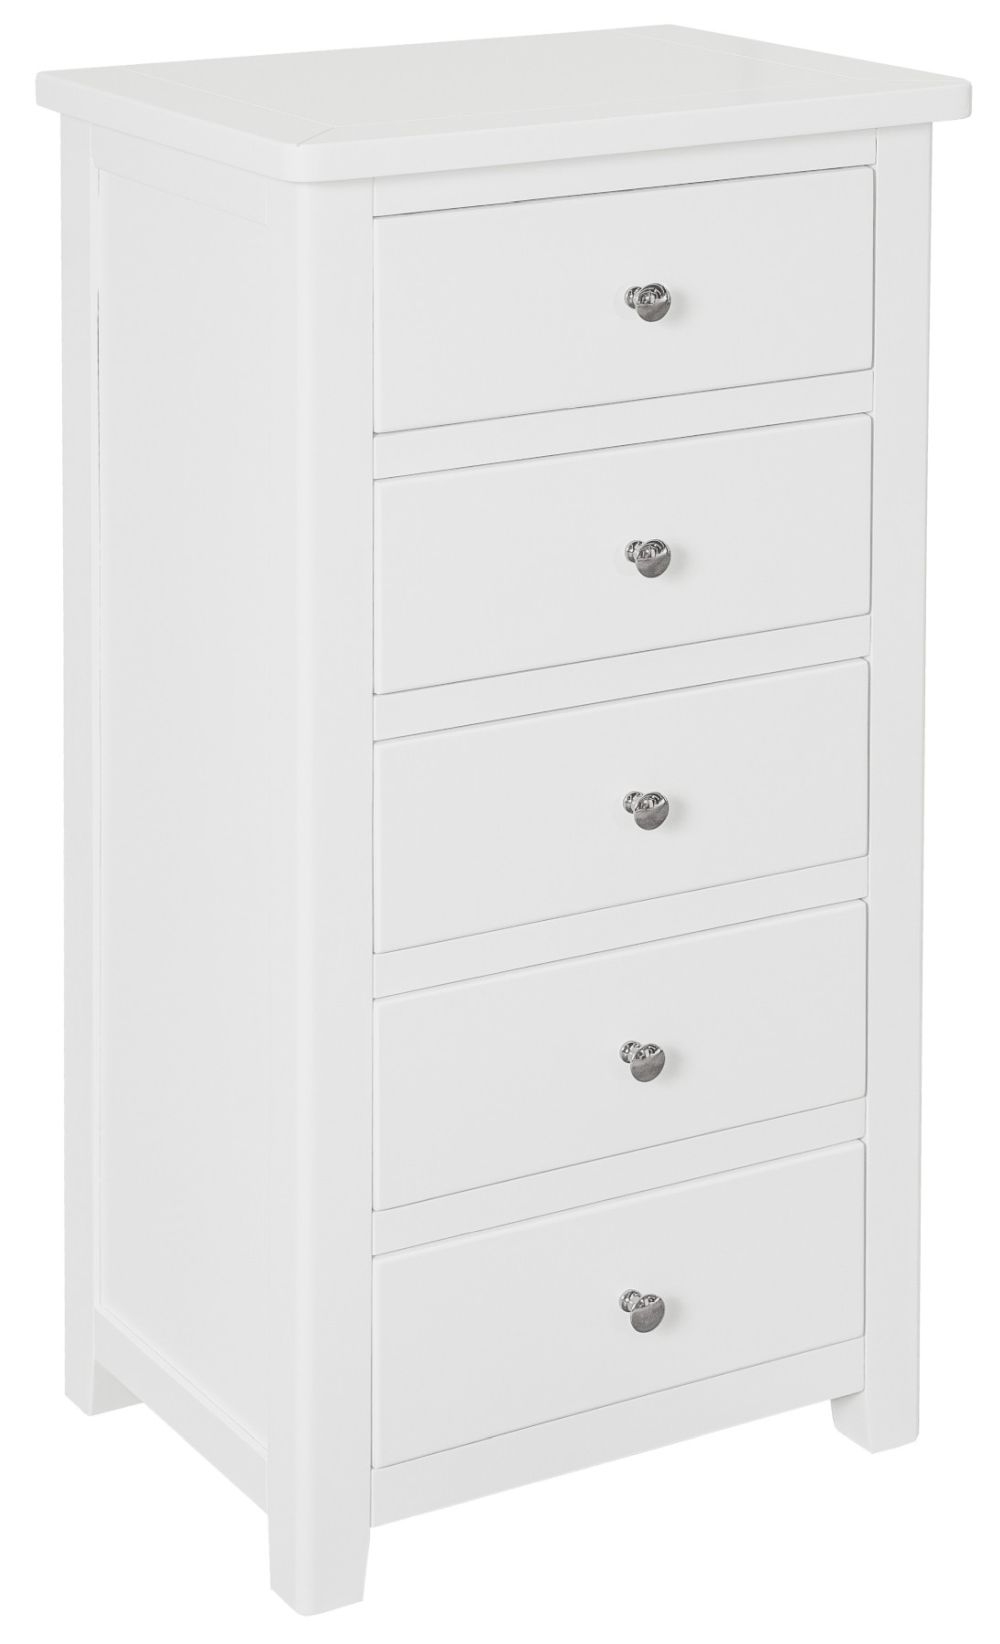 Henley White Painted 5 Drawer Narrow Chest